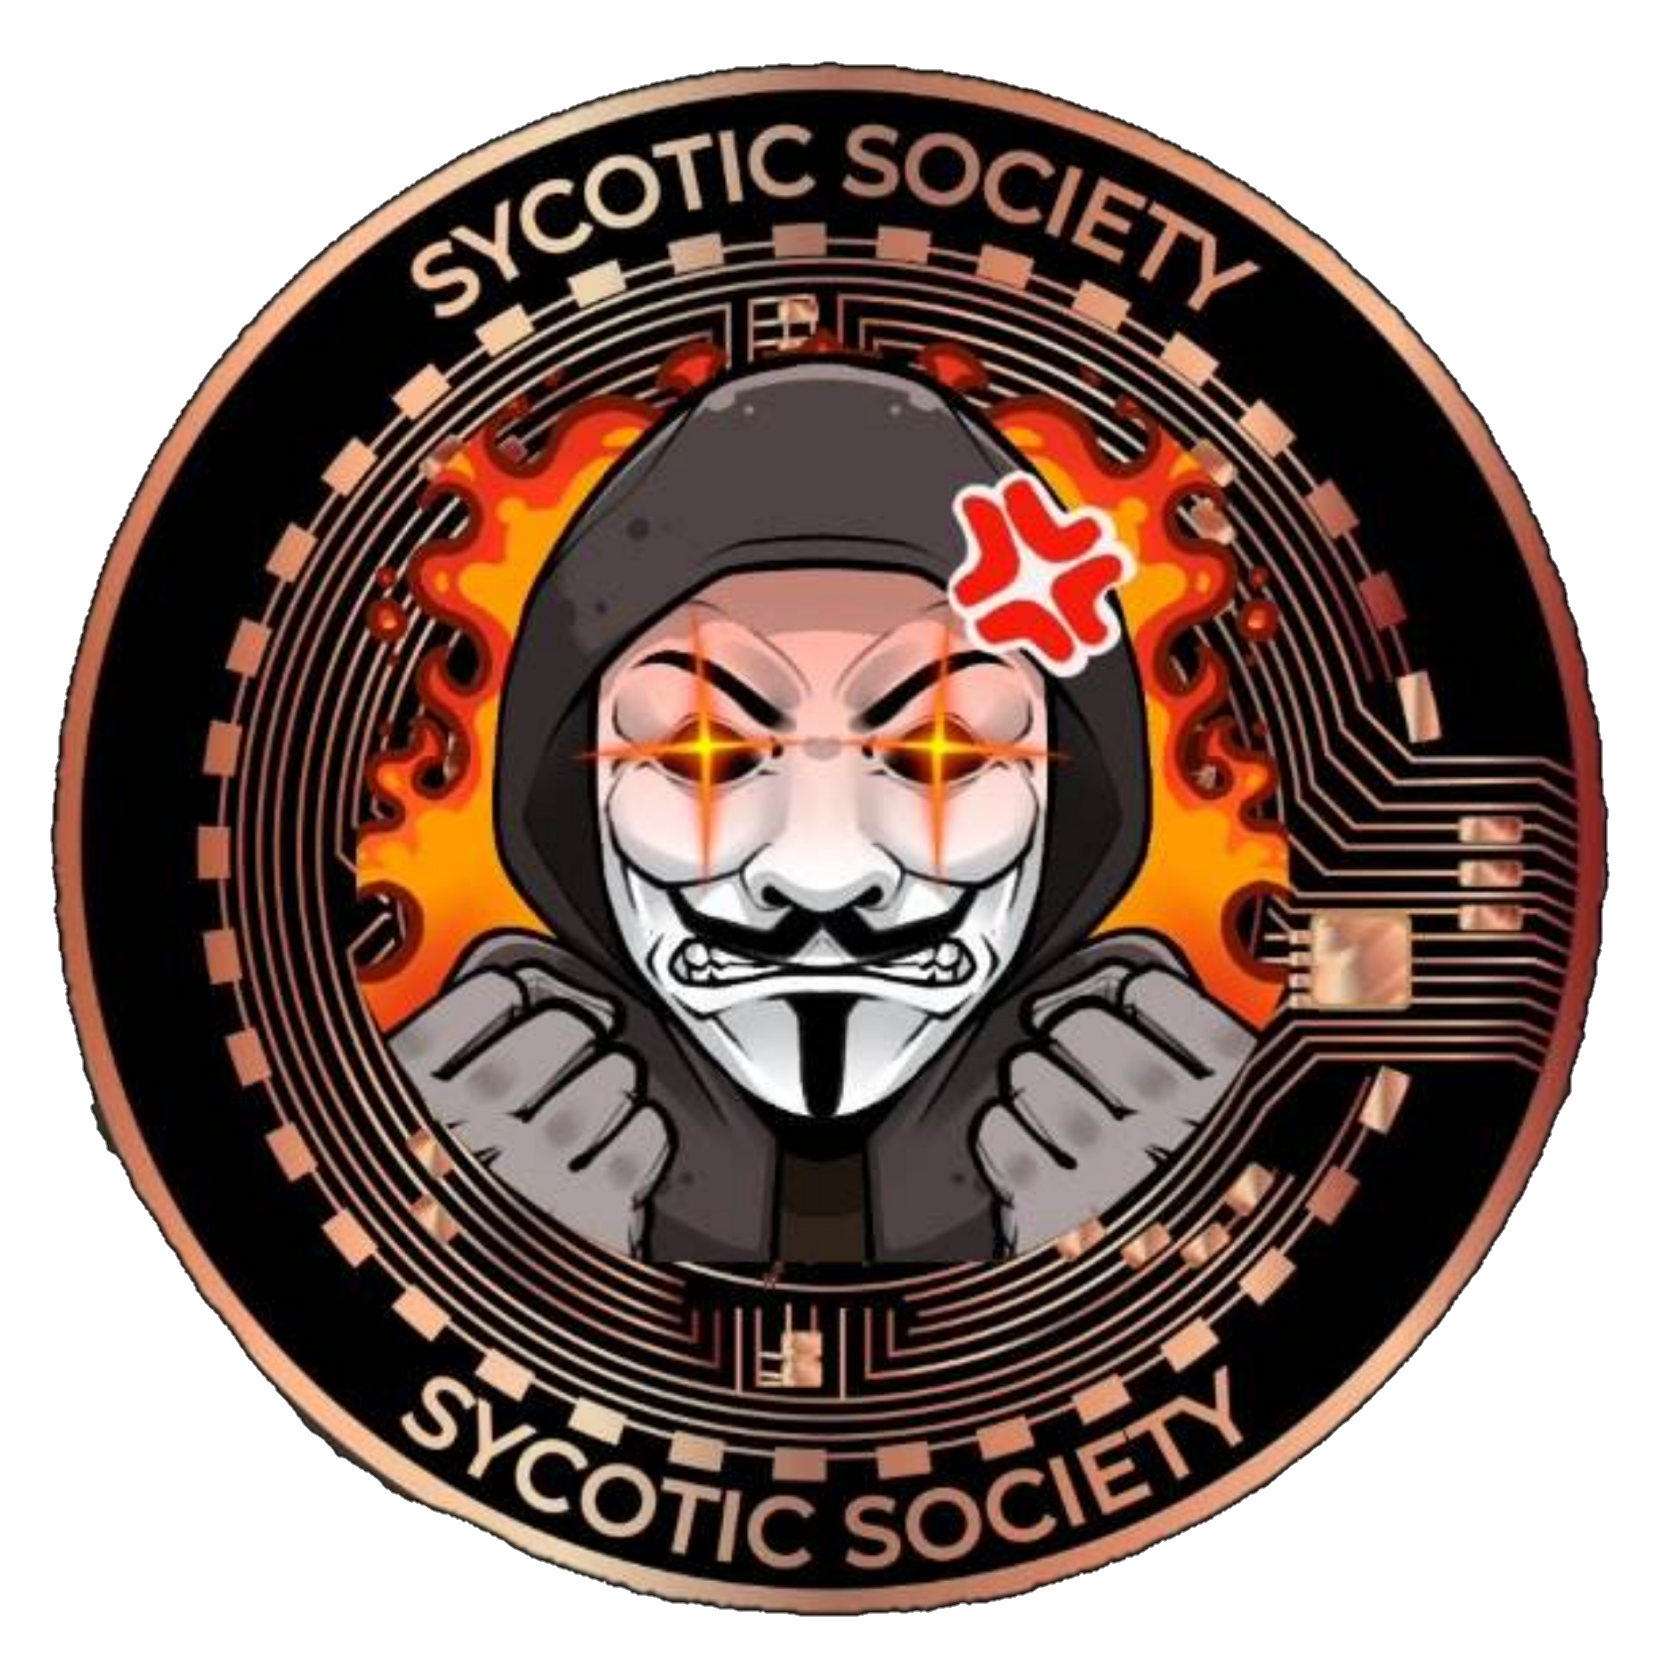 Sycotic Society Image